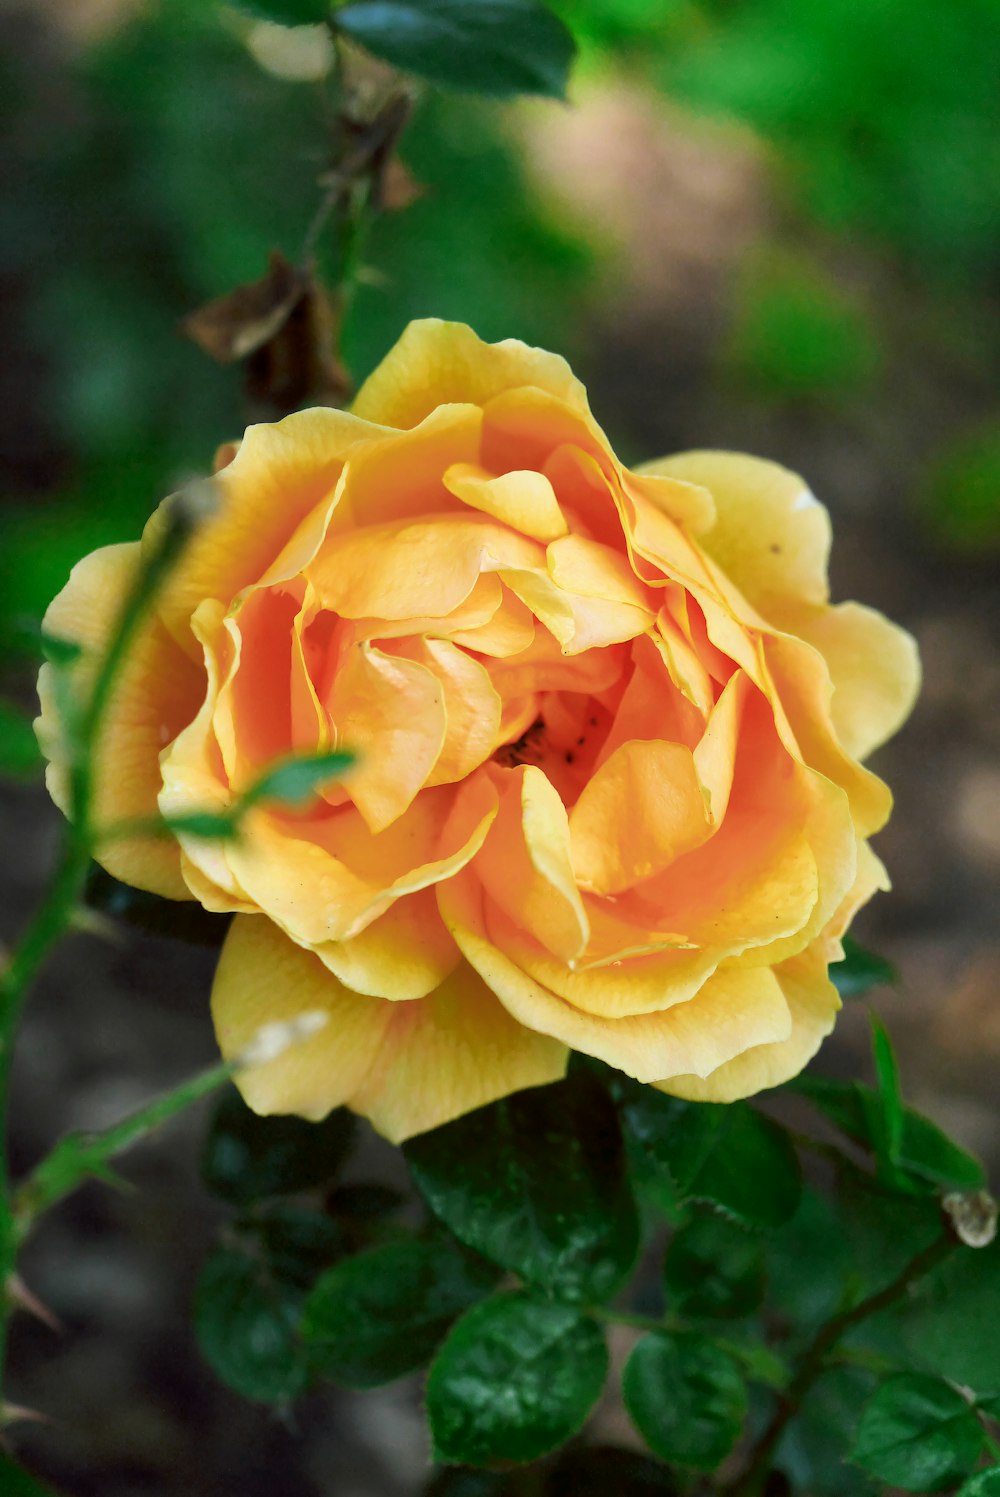 a close up of a yellow rose